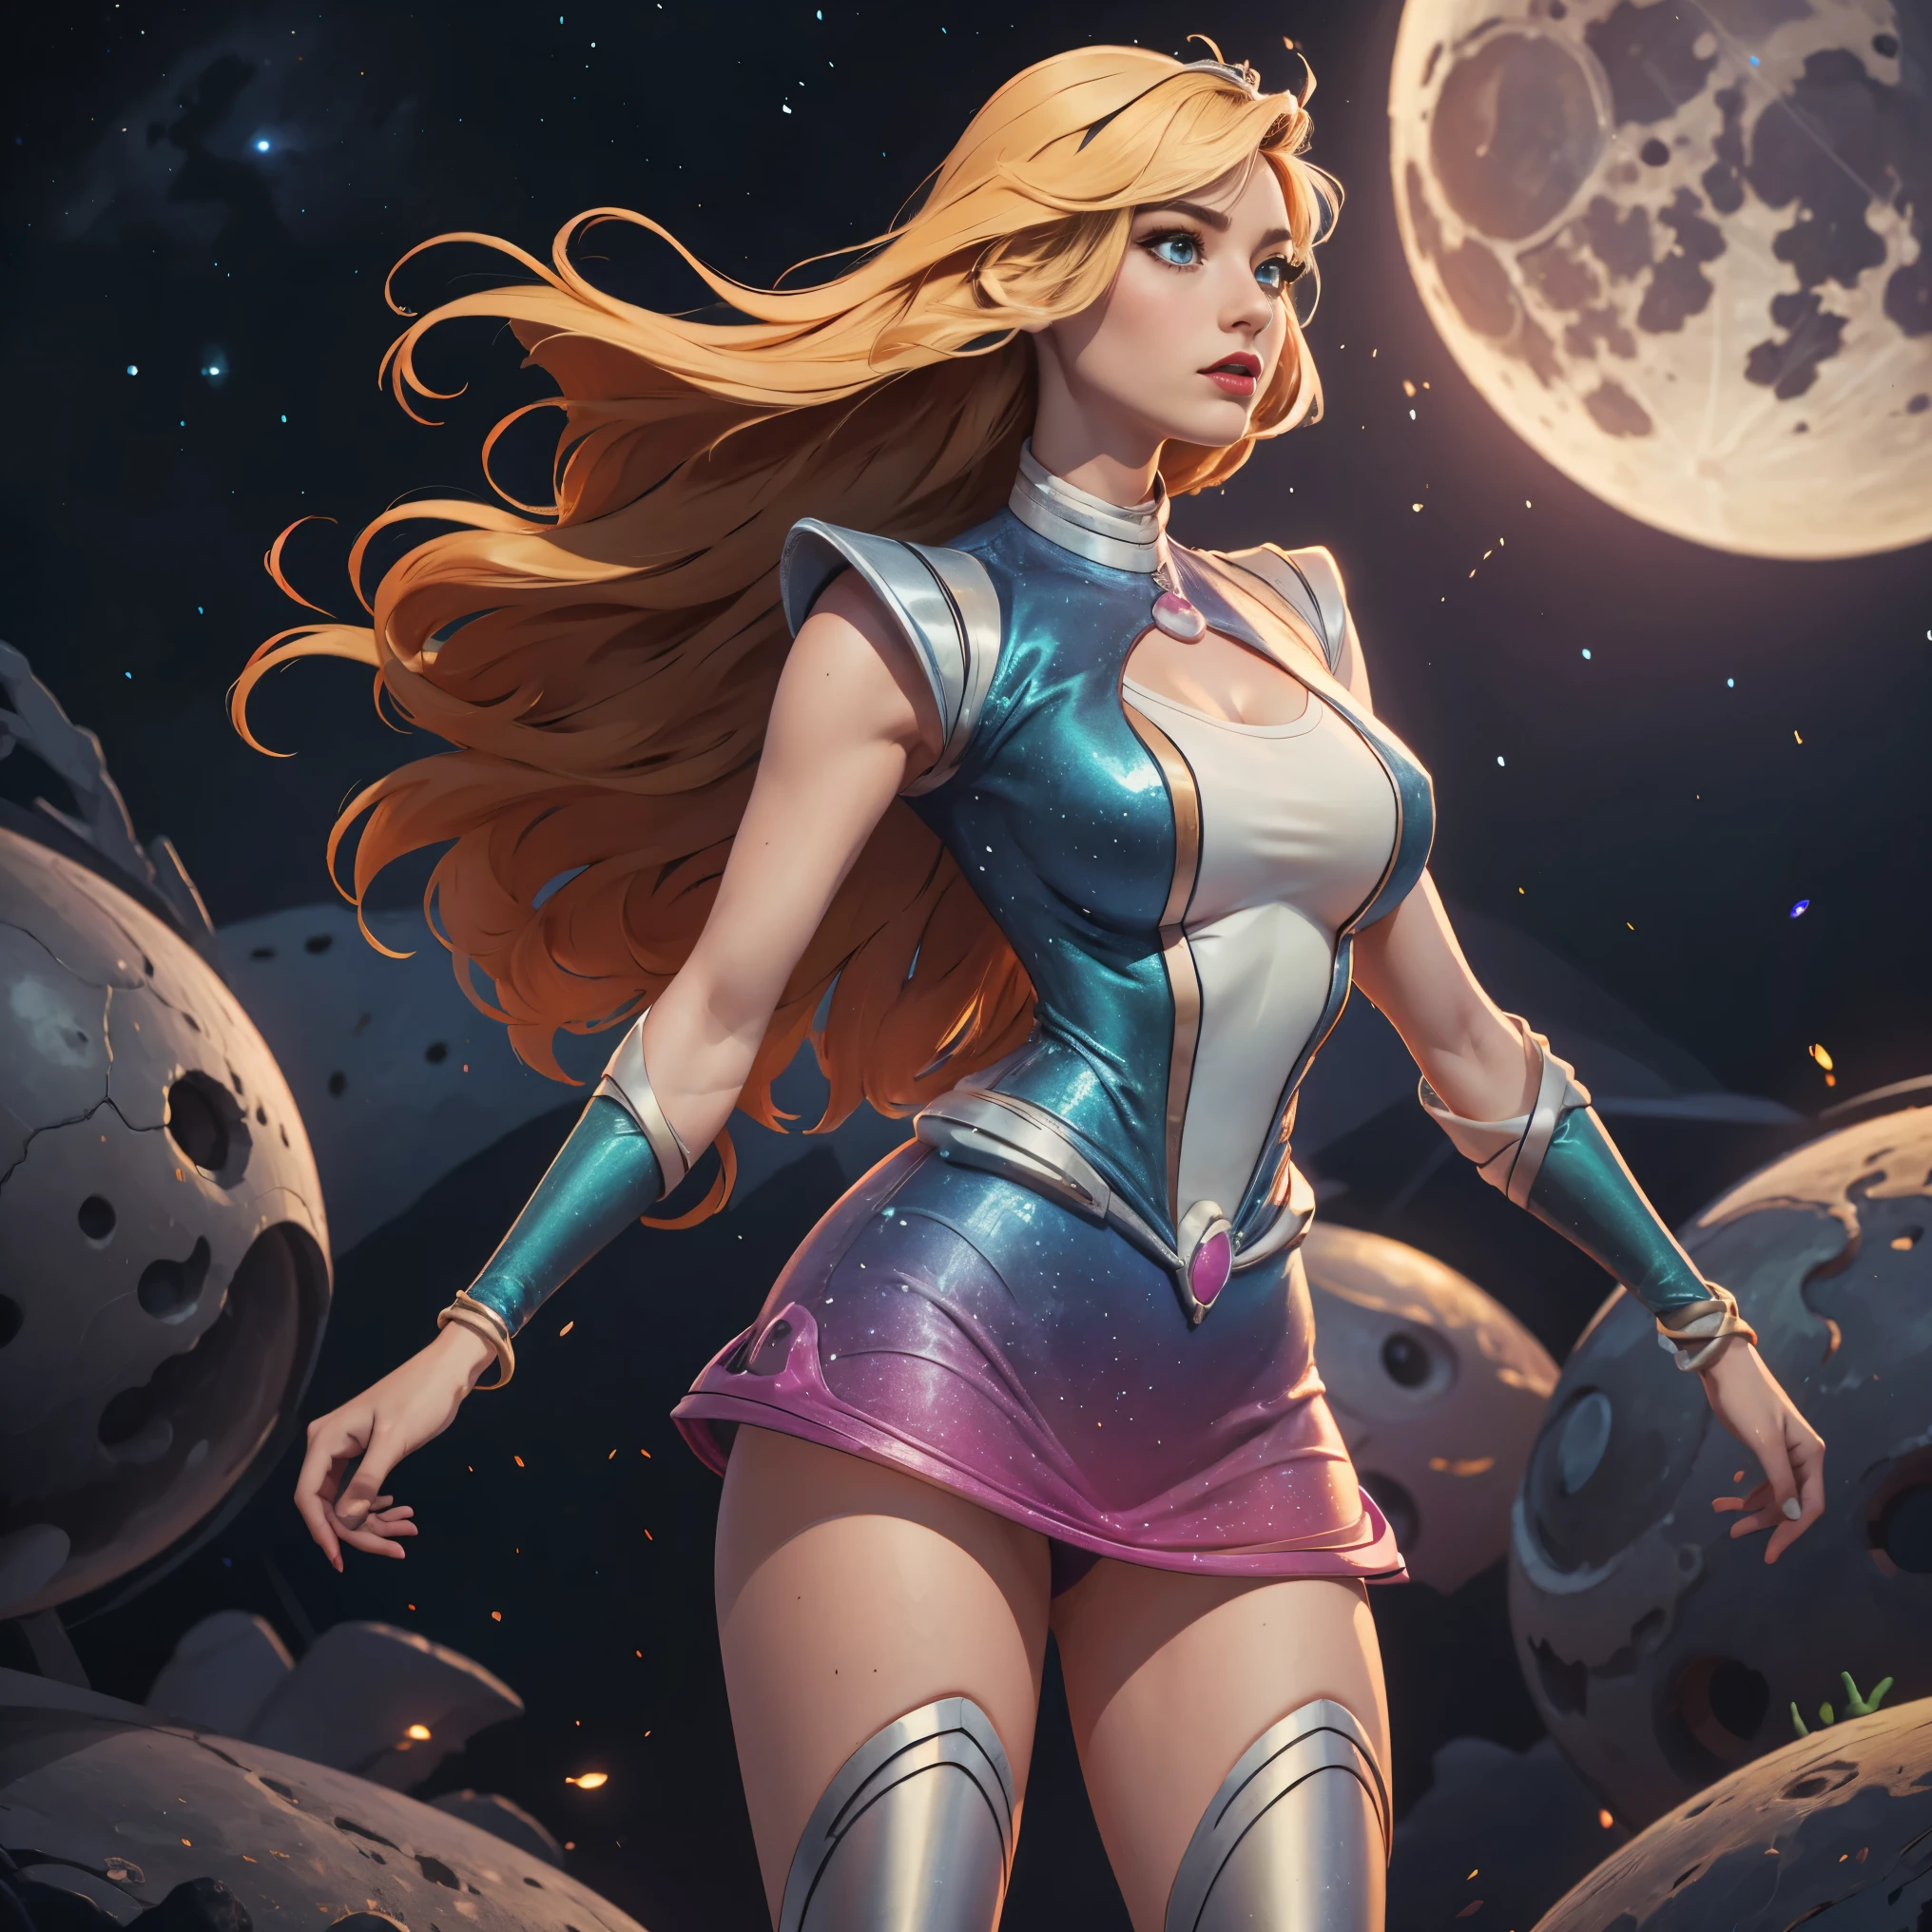 We can see Planet Earth on the sky from the Surface of the Moon. Beautiful nude woman with massive breasts. The breasts are not covered by anything. Red full lips. full body view. Sexy blonde hyper realistic model with well detailed green eyes, thin face. shiny blue stockings. Woman is standing on the moon